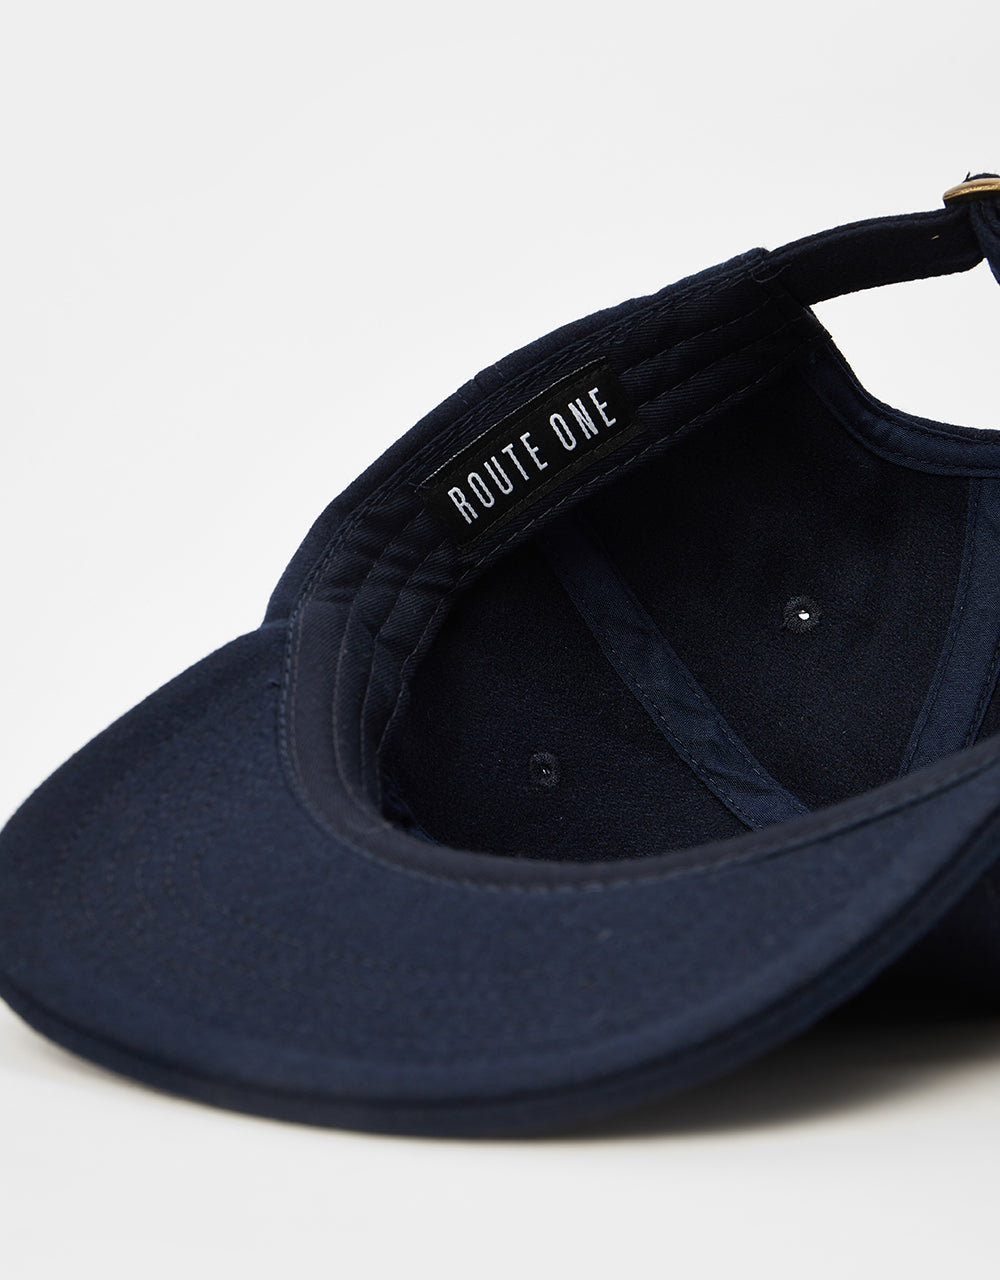 Route One Unstructured Melton Wool Cap - Navy